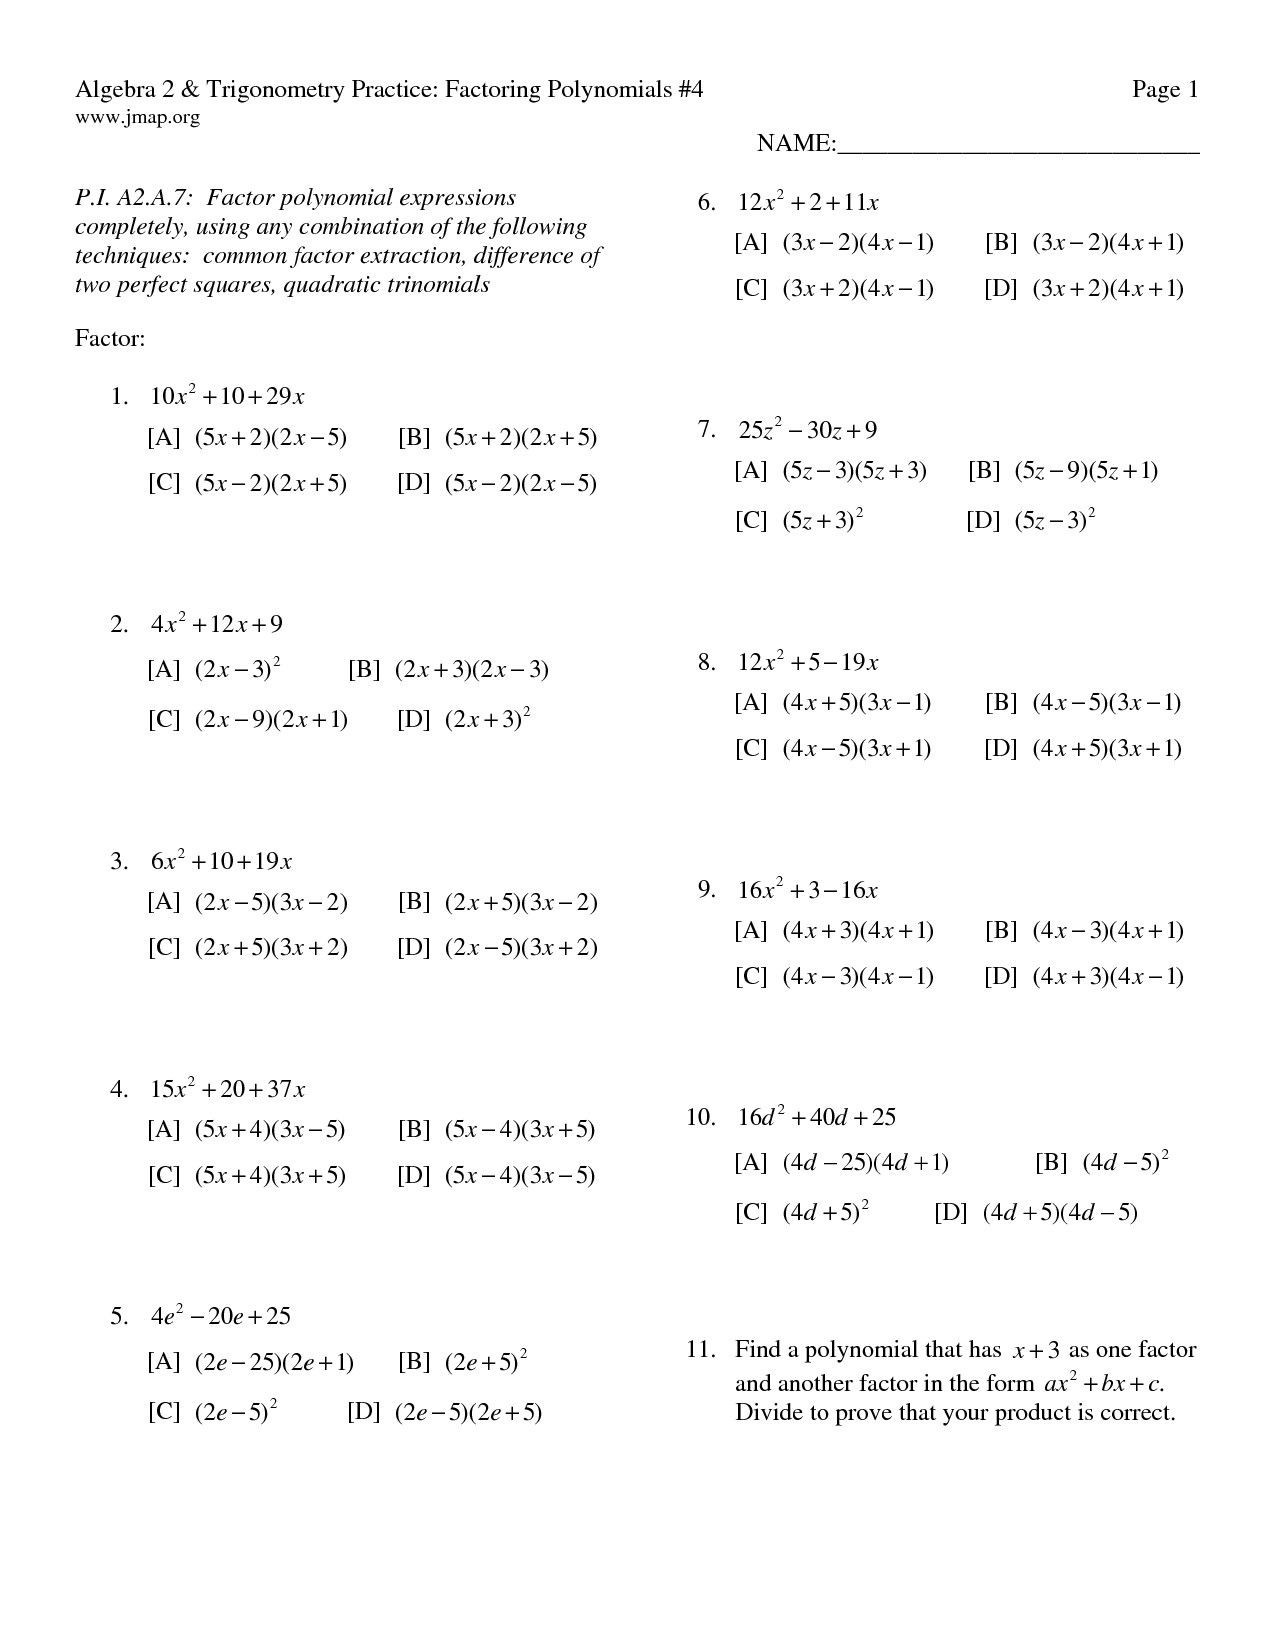 Completing the Square Practice Worksheet Pleting the Square Worksheet Tes